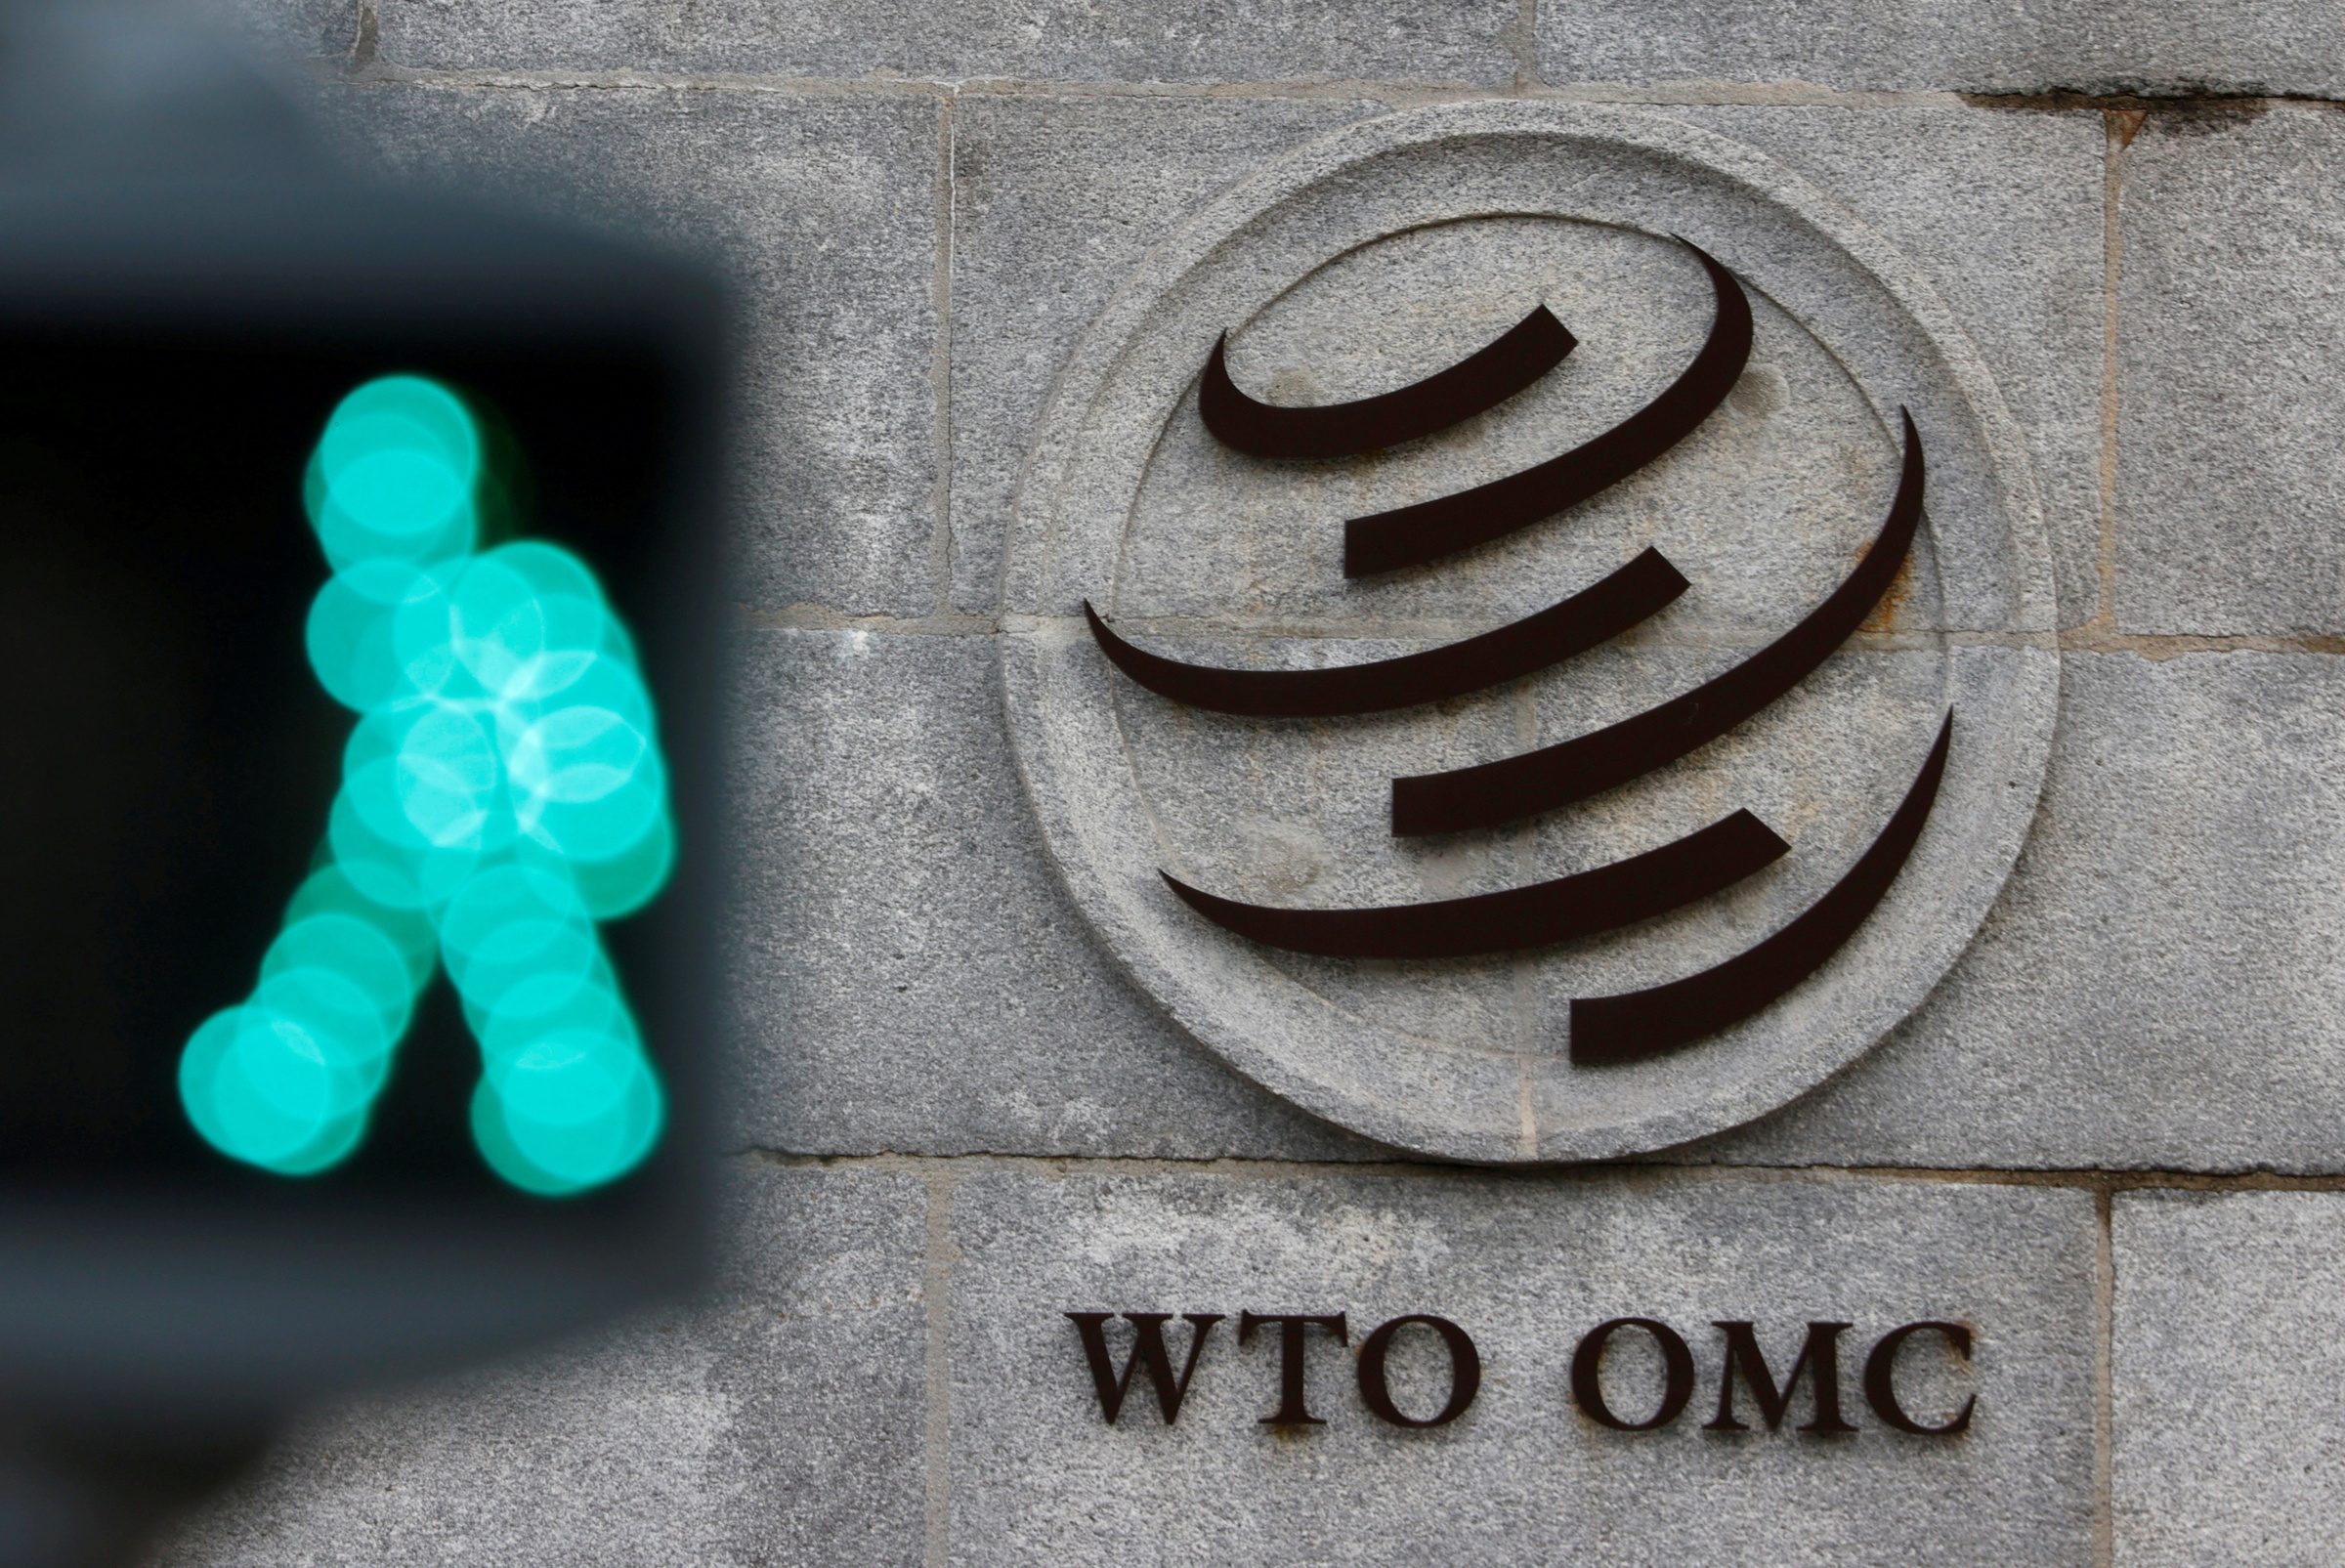 67 nations in WTO agree to cut red tape in services trade